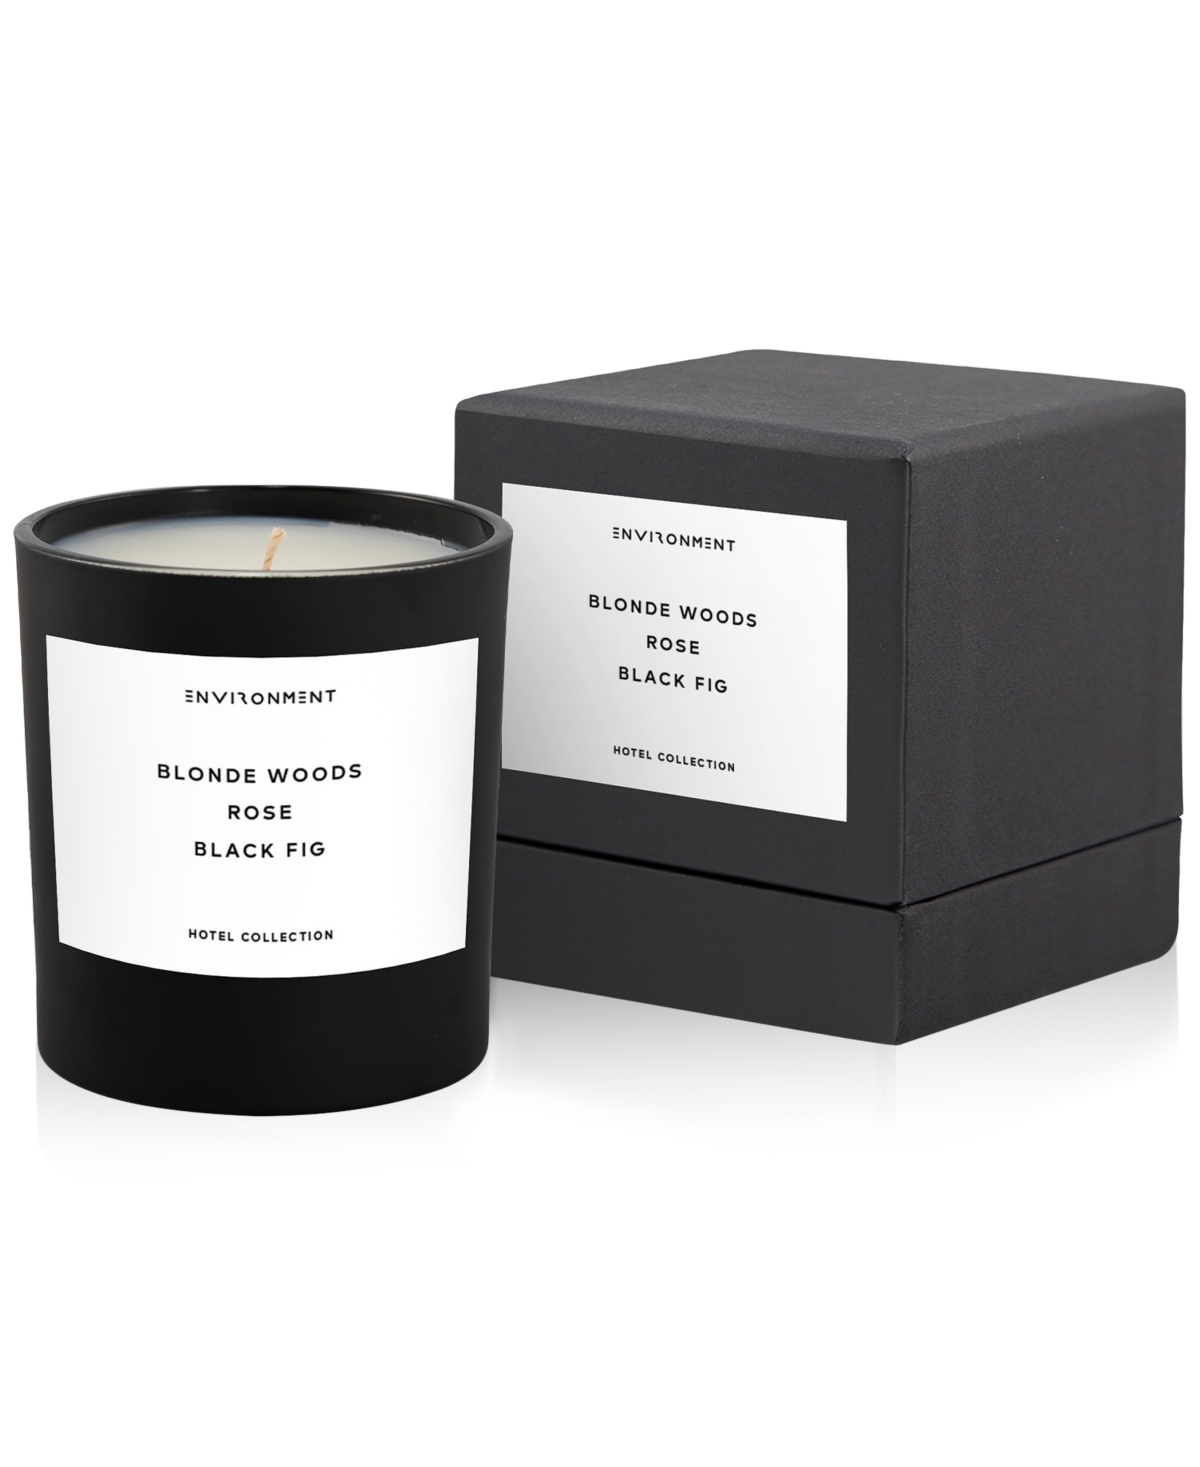 Blonde Woods, Rose & Black Fig Candle (Inspired by 5-Star Hotels), 8 oz.